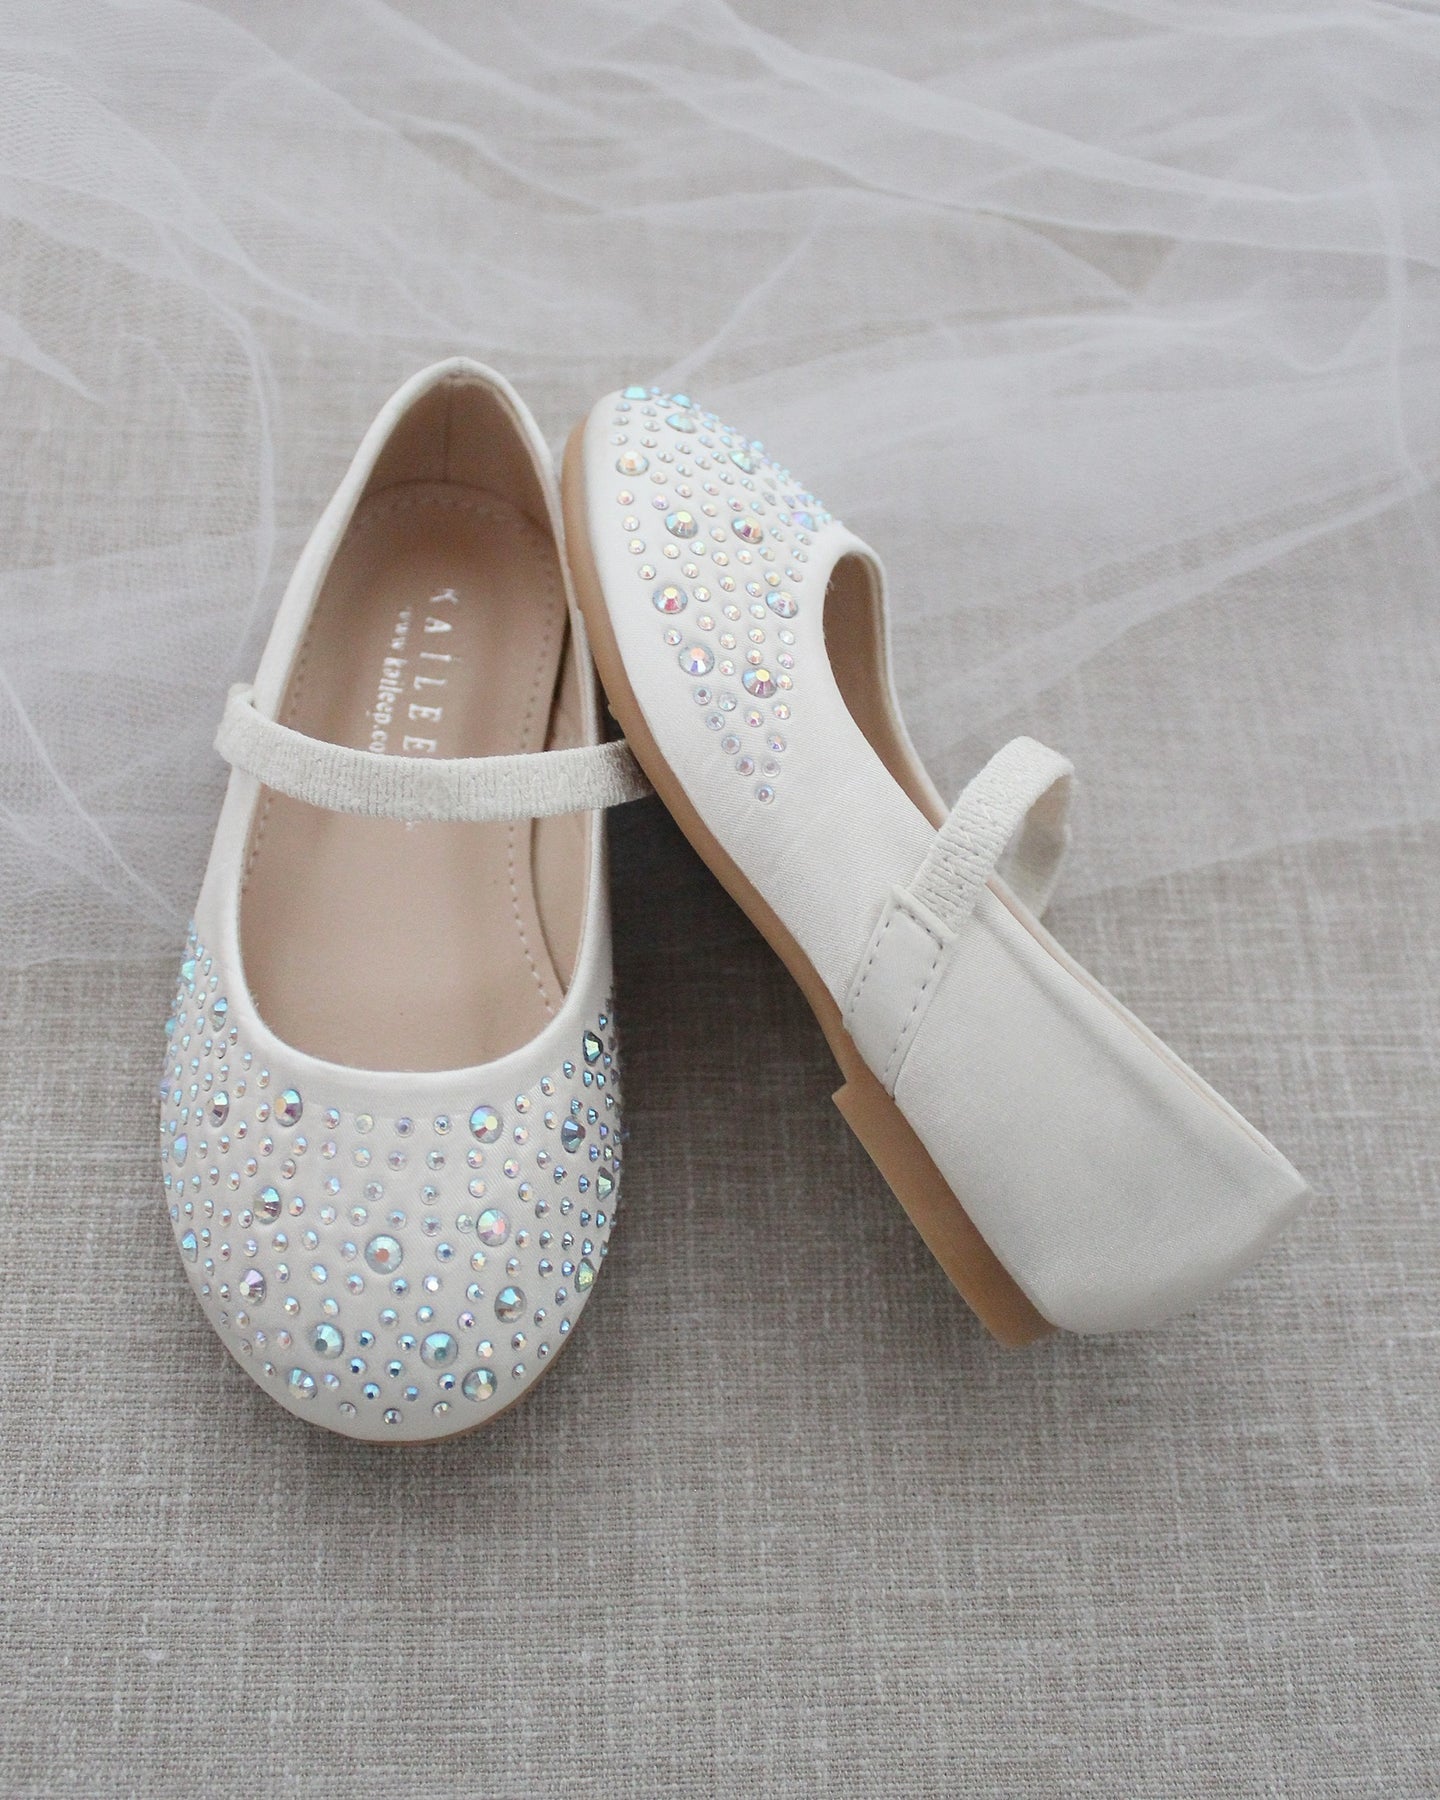 Flower Girls Shoes, princess shoes in glitter, satin and sequins ...